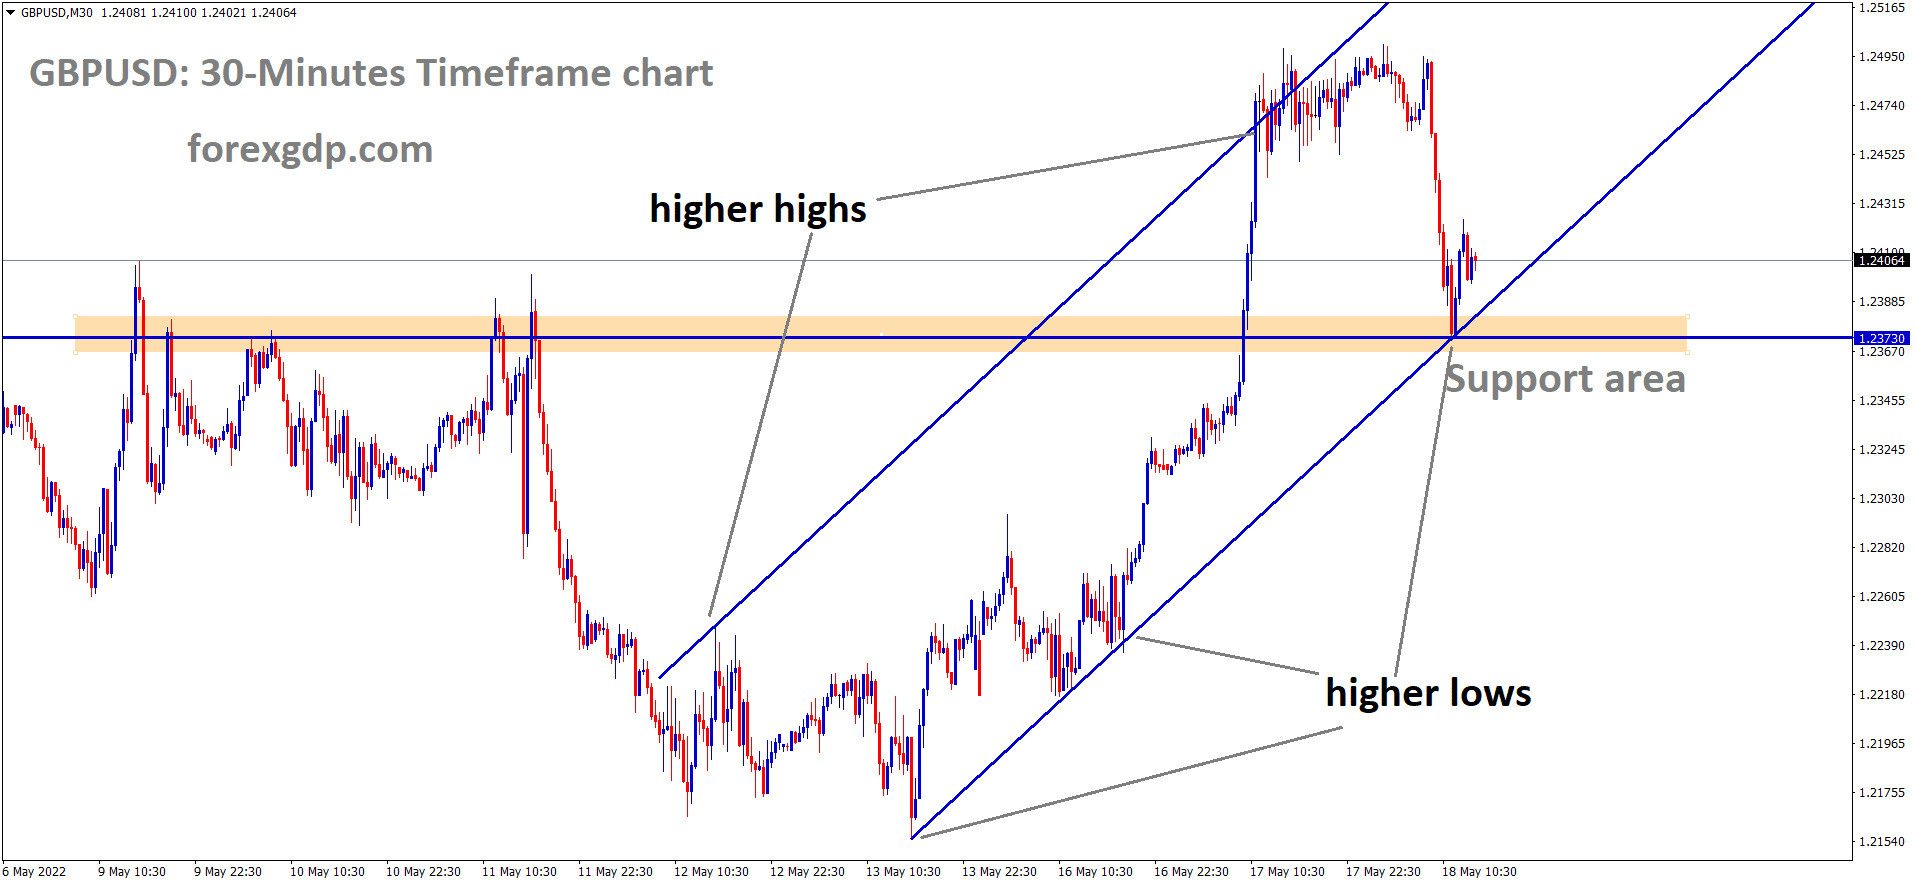 GBPUSD is moving in the ascending channel and market has reached the horizontal support and higher low area of the channel.